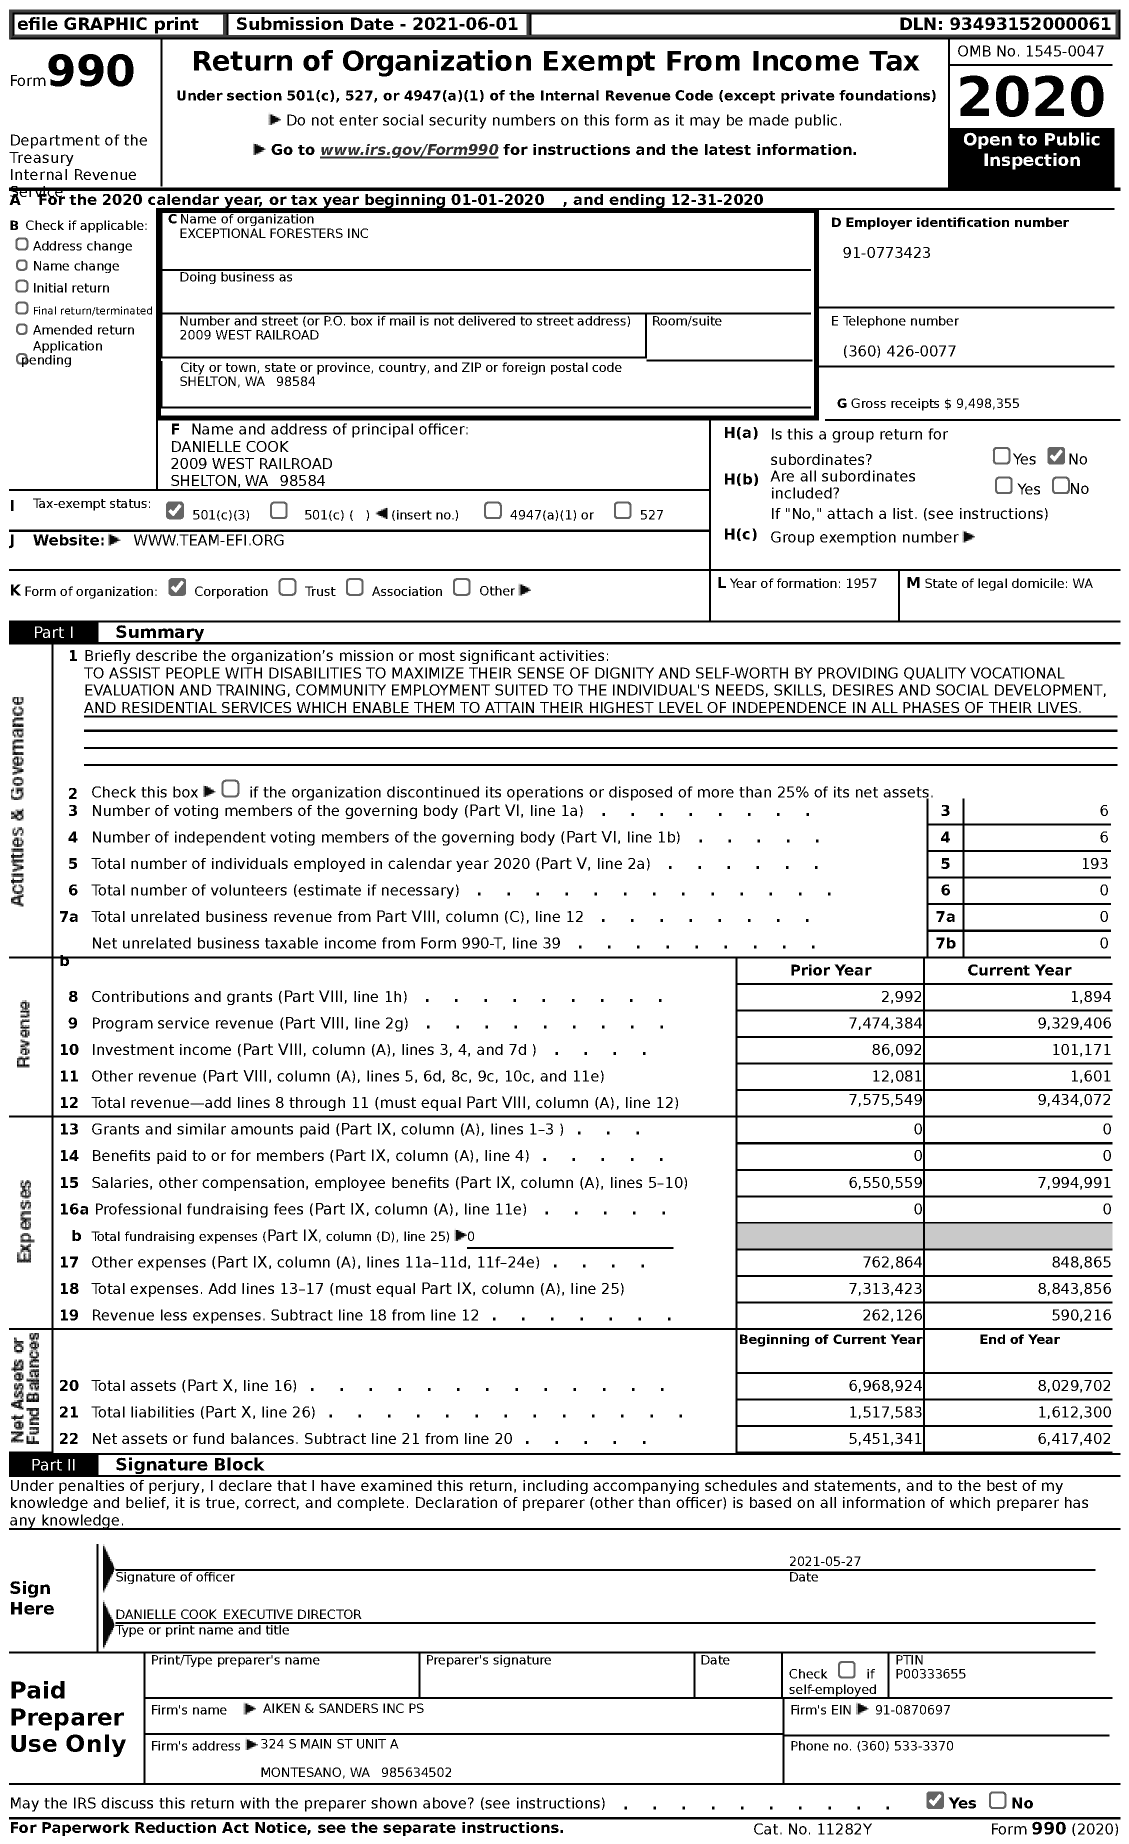 Image of first page of 2020 Form 990 for Exceptional Foresters